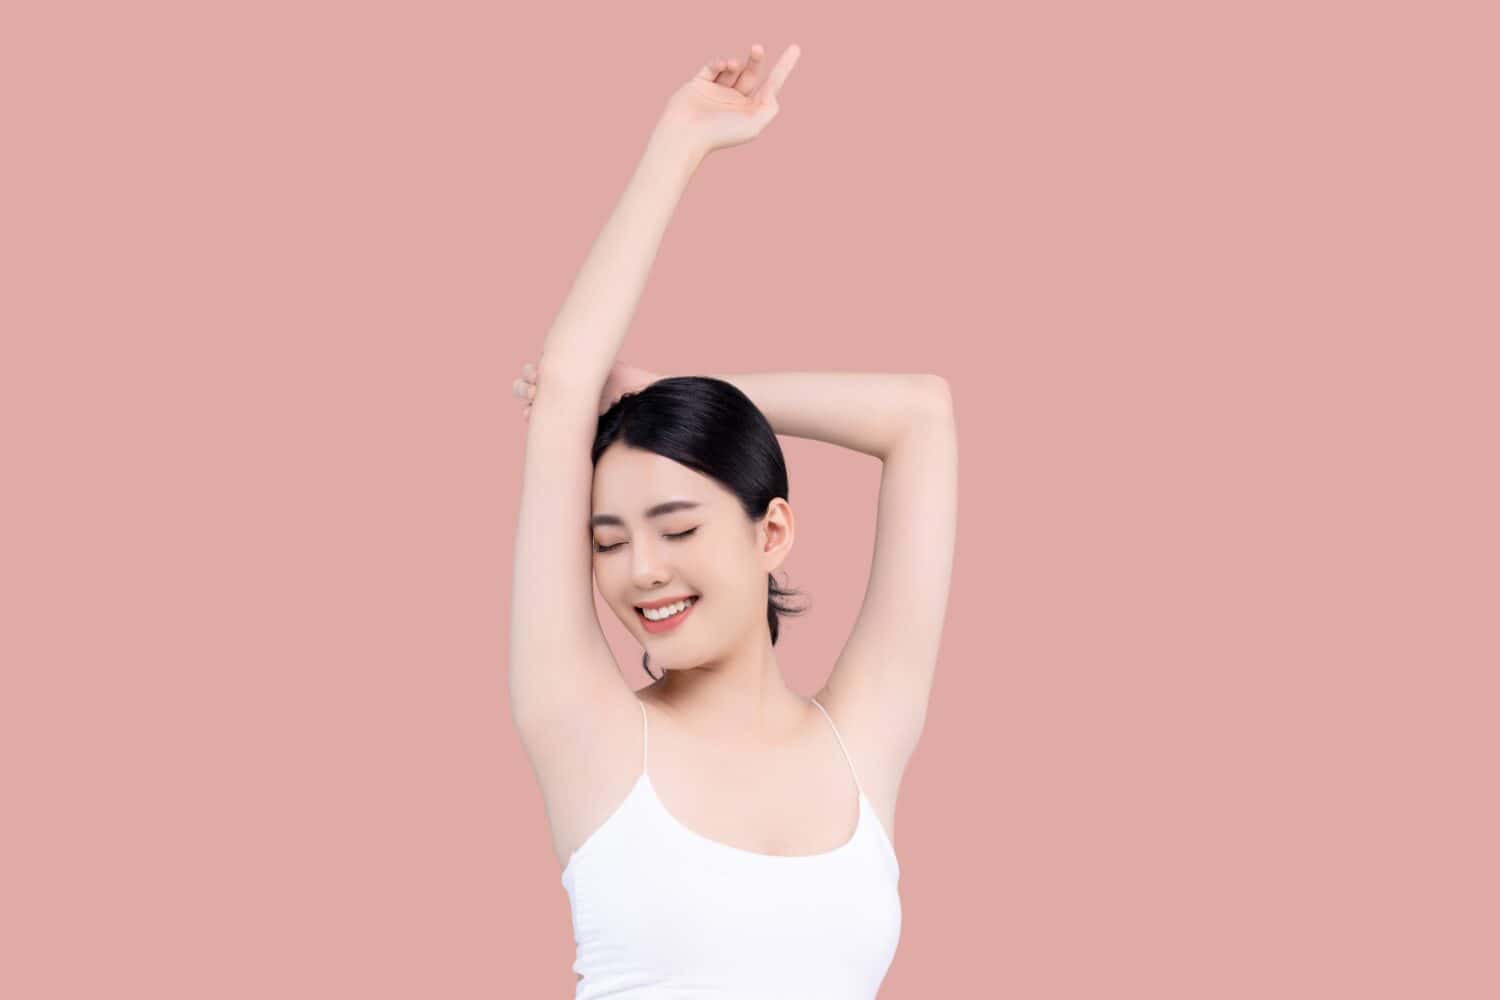 Beautiful young Asian girl lifting hand up to shows off clean and clear armpit or underarms isolated on pink background, Smooth and freshness armpit concept.